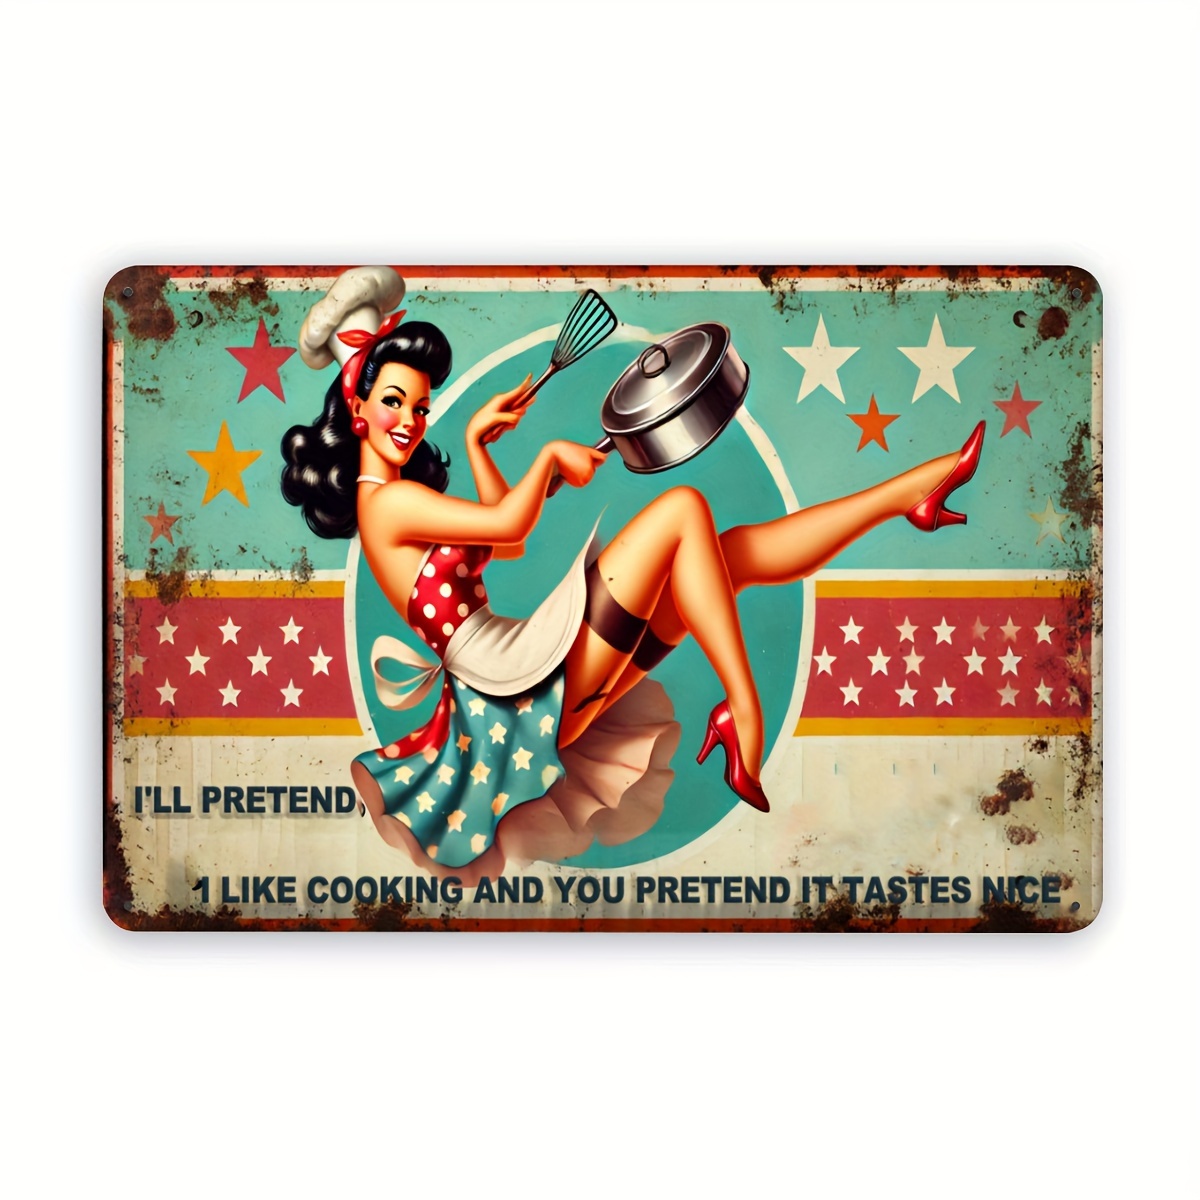 

Retro Kitchen Rules Tin Sign Art Set Of 1, Vintage Iron Wall Art Decor For Home, Restaurant, Bar, Cafe, Man Cave, Indoor And Outdoor Patio, Humorous Cooking Quotes, Durable Metal Posters 8x12 Inch